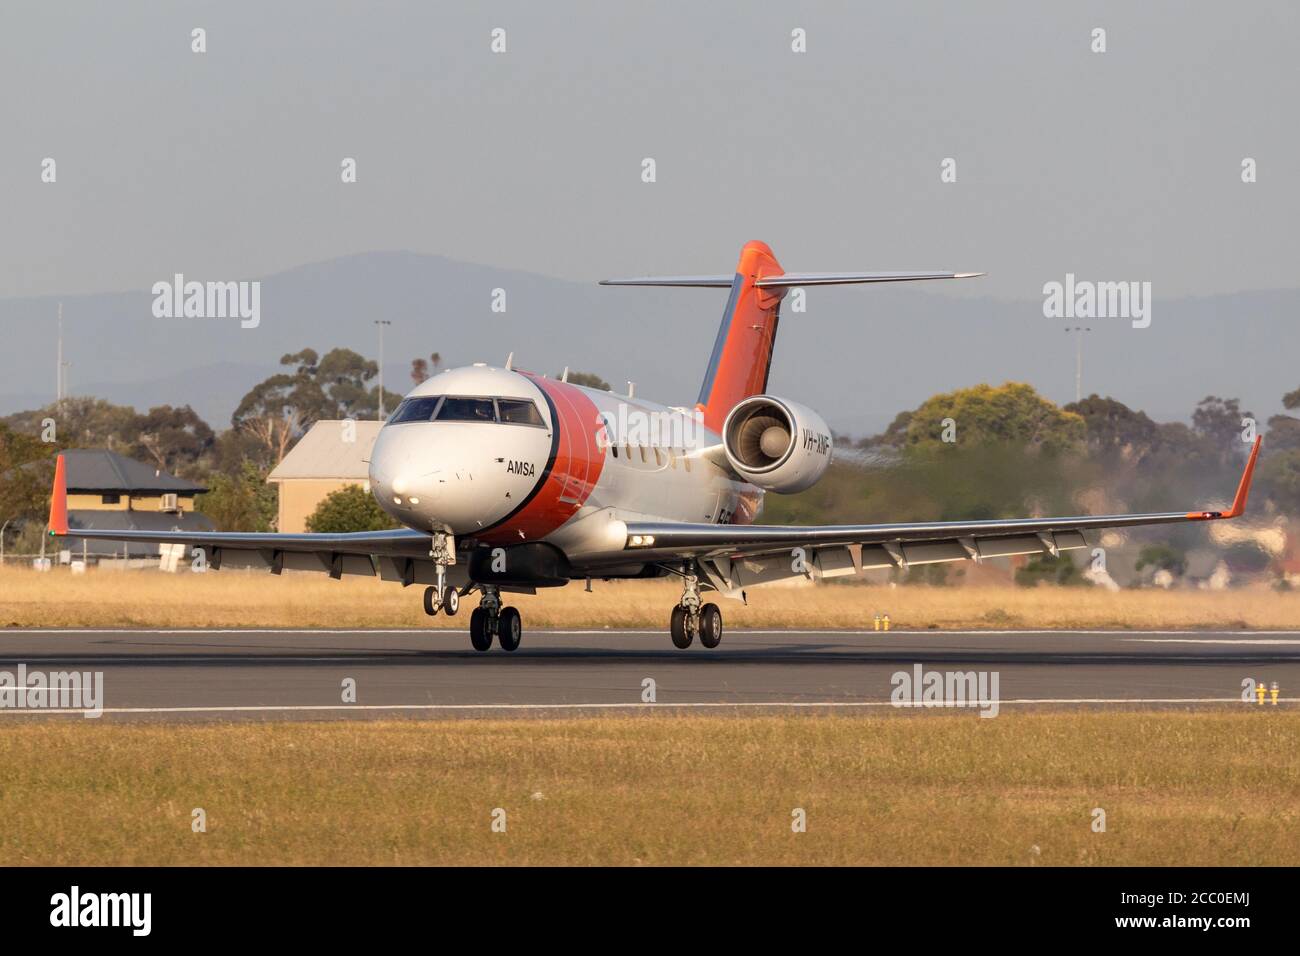 Australian Maritime Safety Authority (AMSA) Bombardier Challenger 604 aircraft used for maritime patrol, surveillance and search missions. Stock Photo